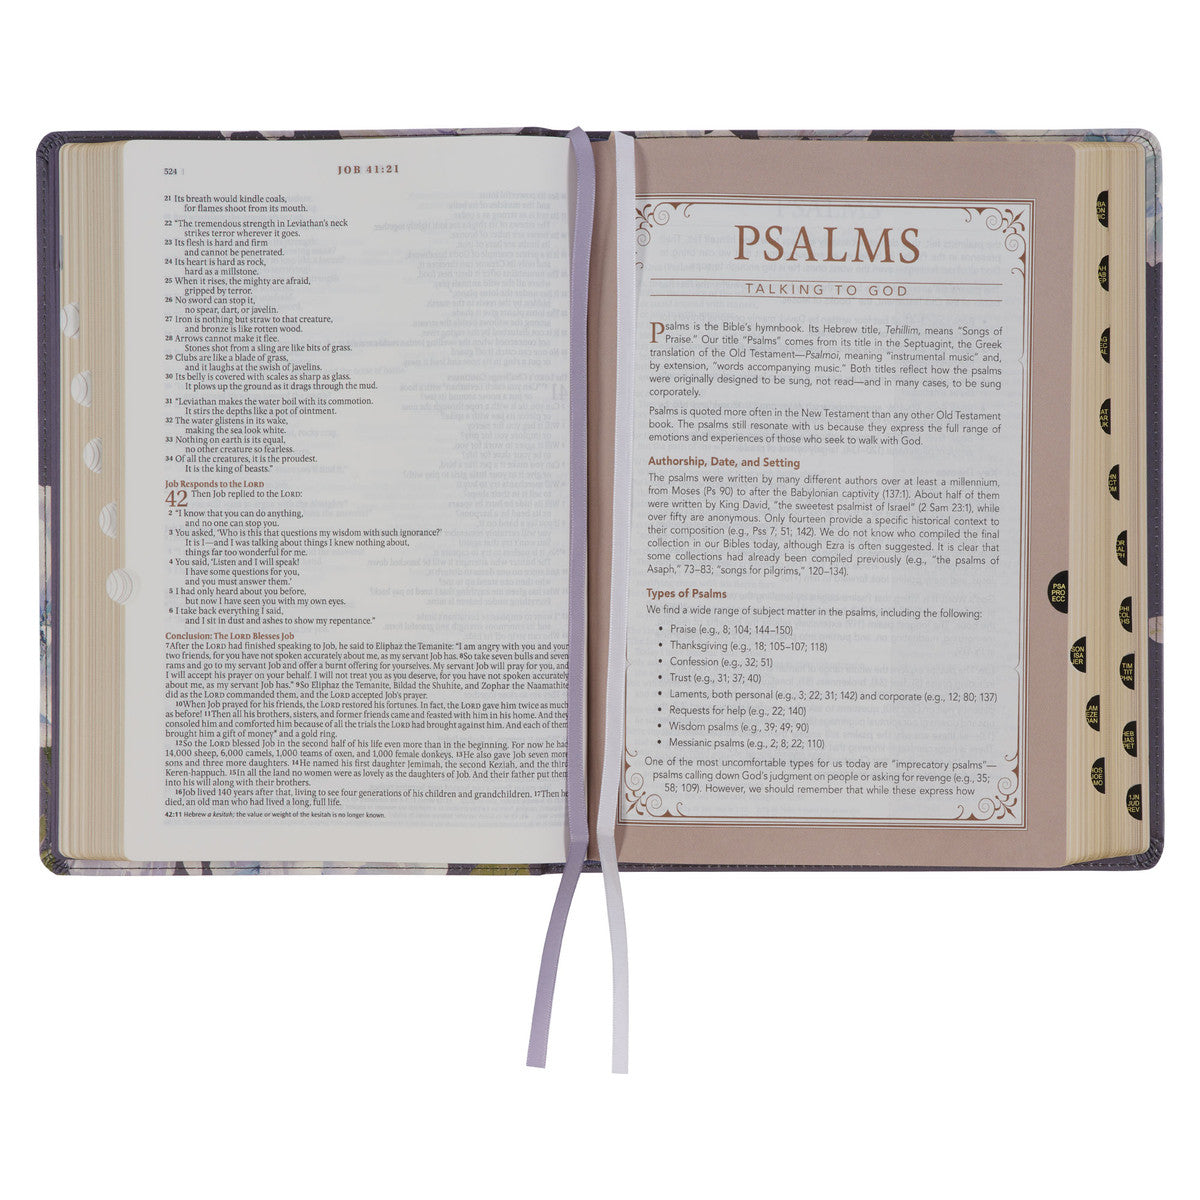 Slate-colored Floral Print Faux Leather Spiritual Growth Bible